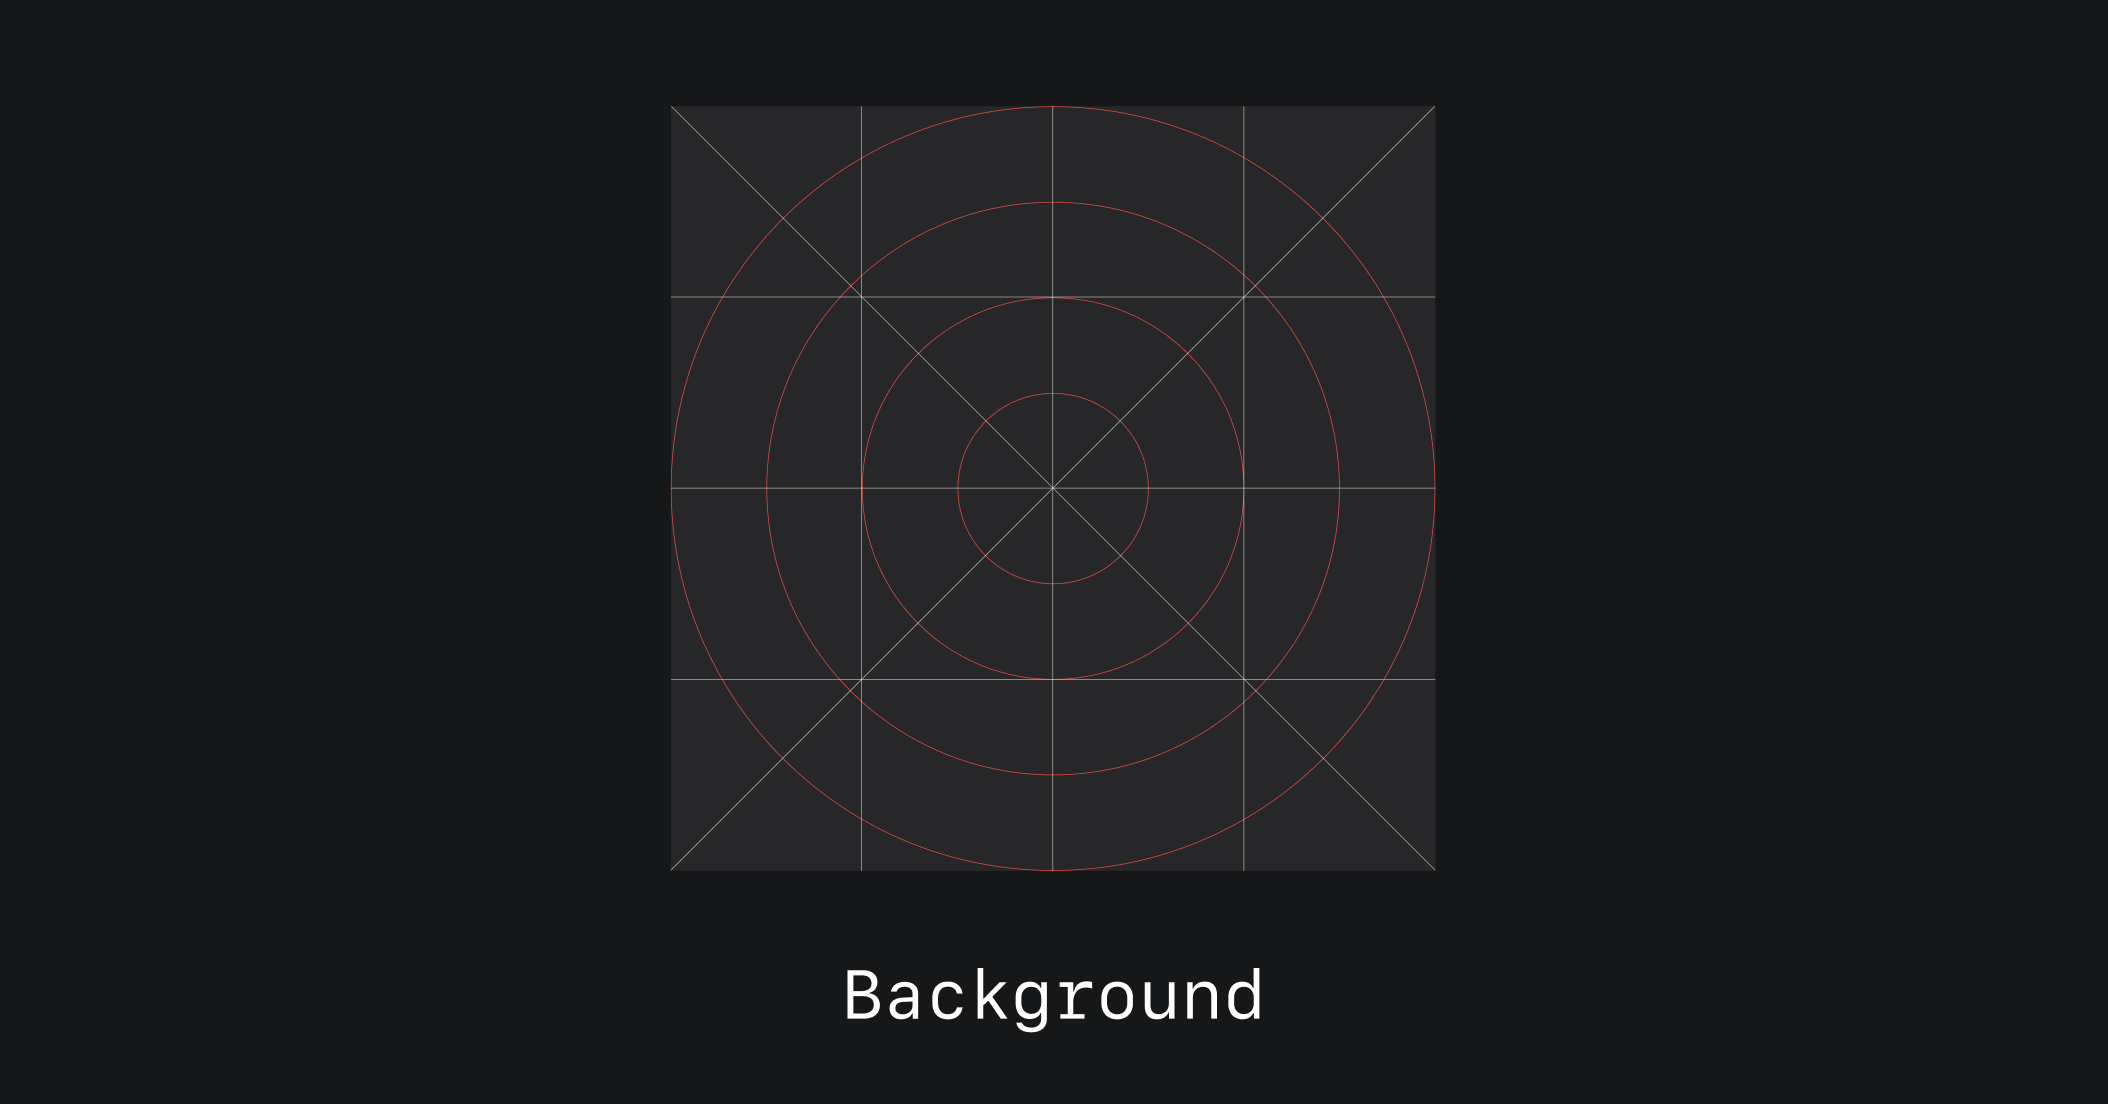 Dark squared grid with four circles overlayed on top of it from the edges of the square to the center